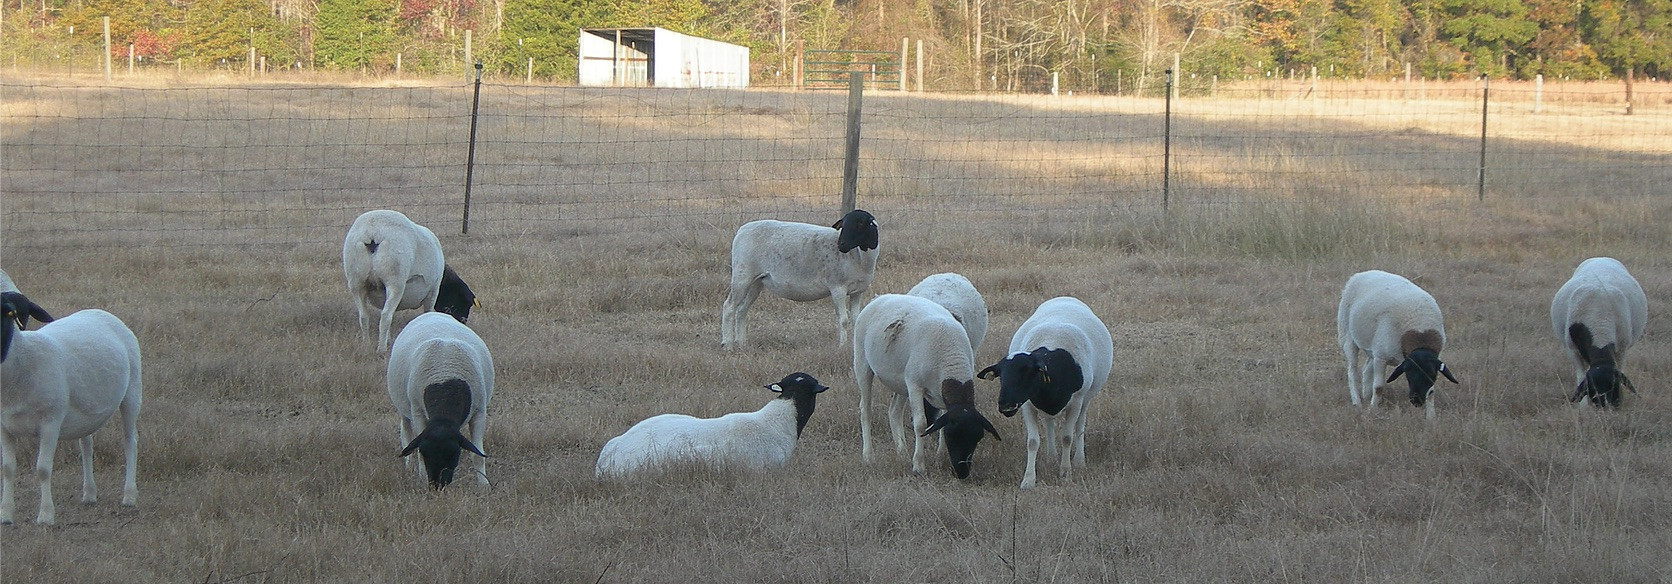 Shelby Acres Farm is engaged in two lines of business…raising breeding quality registered Dorper and White Sheep, as well as lamb production. Shelby Acres is an Animal Welfare Approved farm where sheep are grass-fed in a natural environment without the use of any synthetic growth hormones or antibiotics. Farm sheep and lamb are exported around the world and throughout America. Shelby Acres provides seminars on sheep and lamb production, health, disease management and parasite control. In addition, the farm provides free-range, hormone and antibiotic free Black Copper Maran eggs.